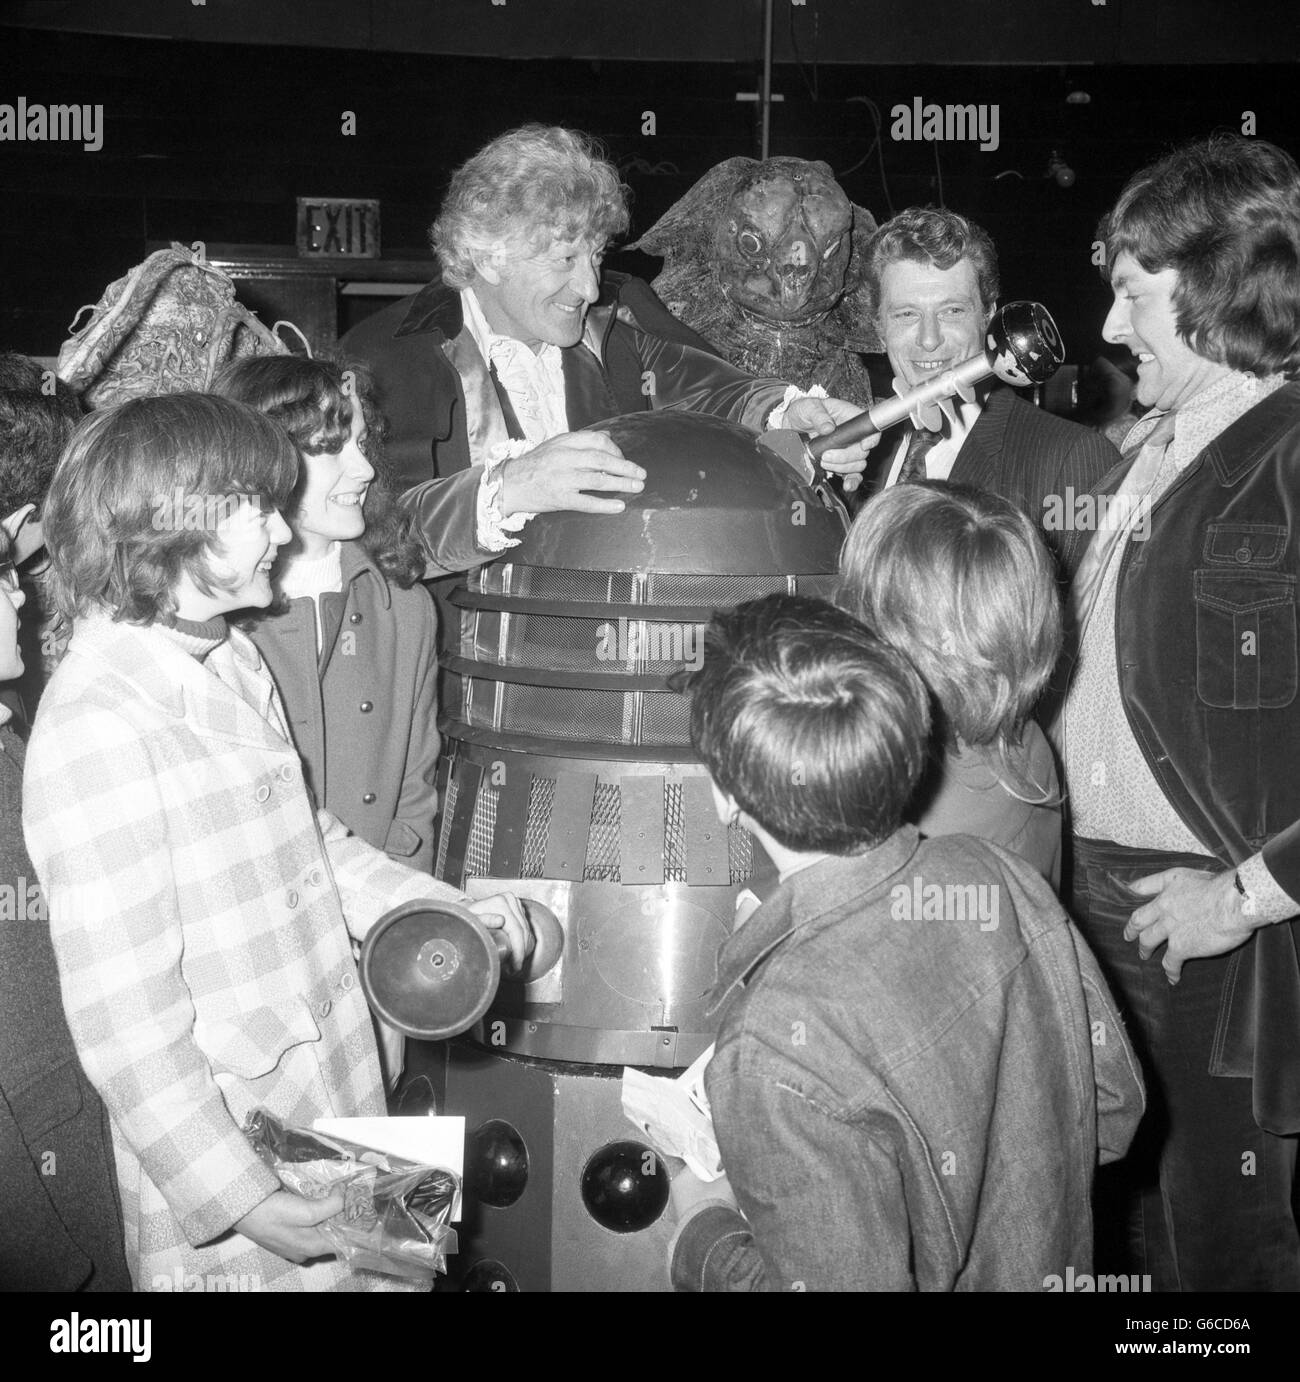 Doctor Who star Jon Pertwee attends the Fact or Fiction science show at the London Planetarium with a Dalek from the sci-fi series. Looking on are Blue Peter presenter Peter Purves (right) and the planetarium's director John Ebdon. Children from Dr Baranardo Homes were guests at the event. Stock Photo